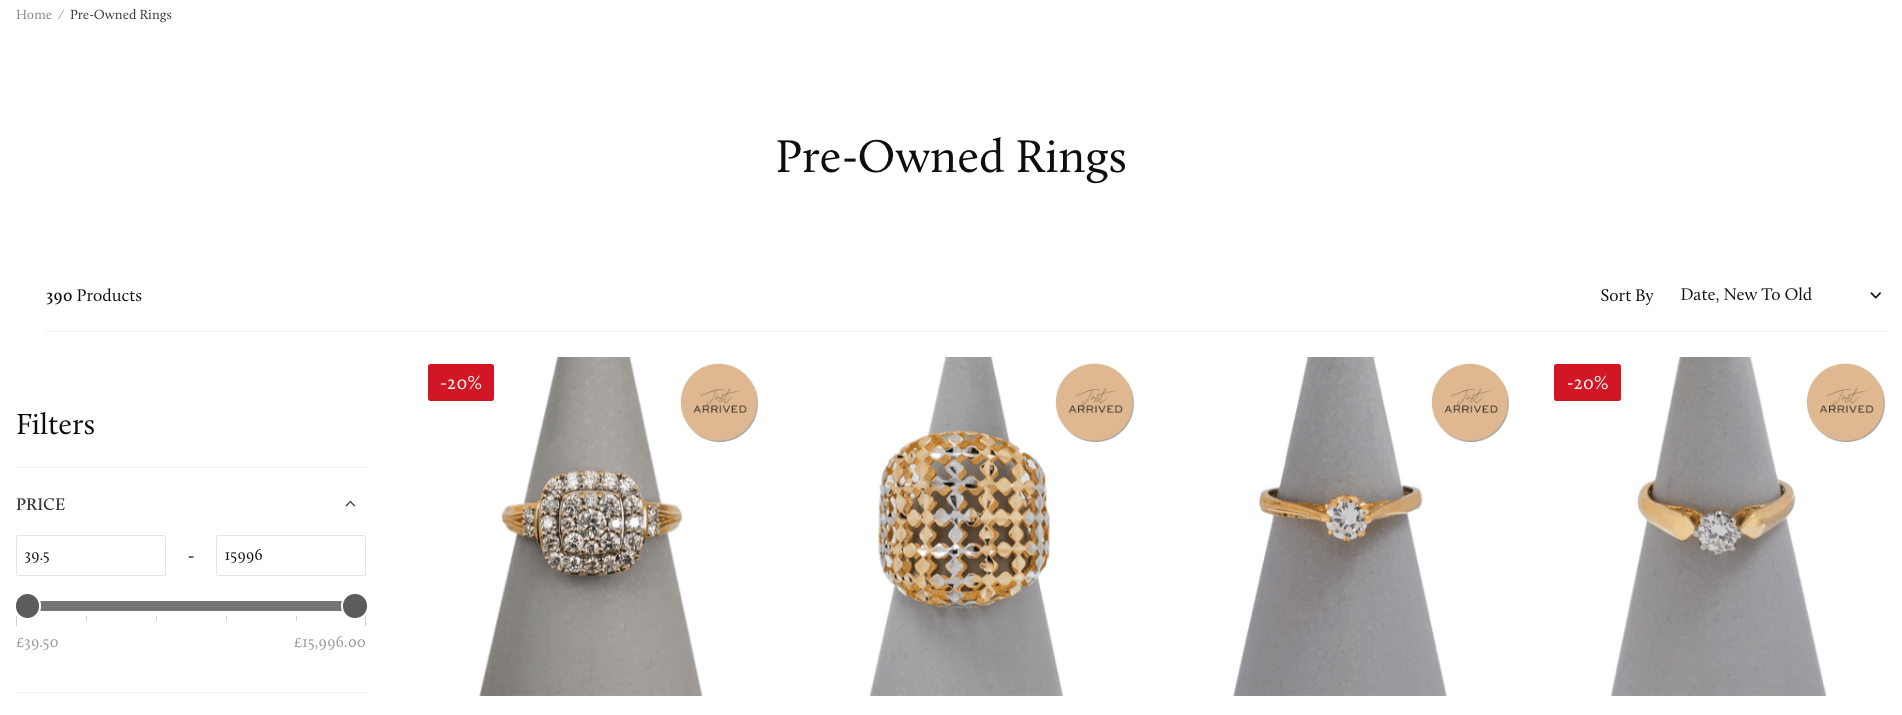 Example of Breadcrumb menu for an ecommerce site that sells jewellery